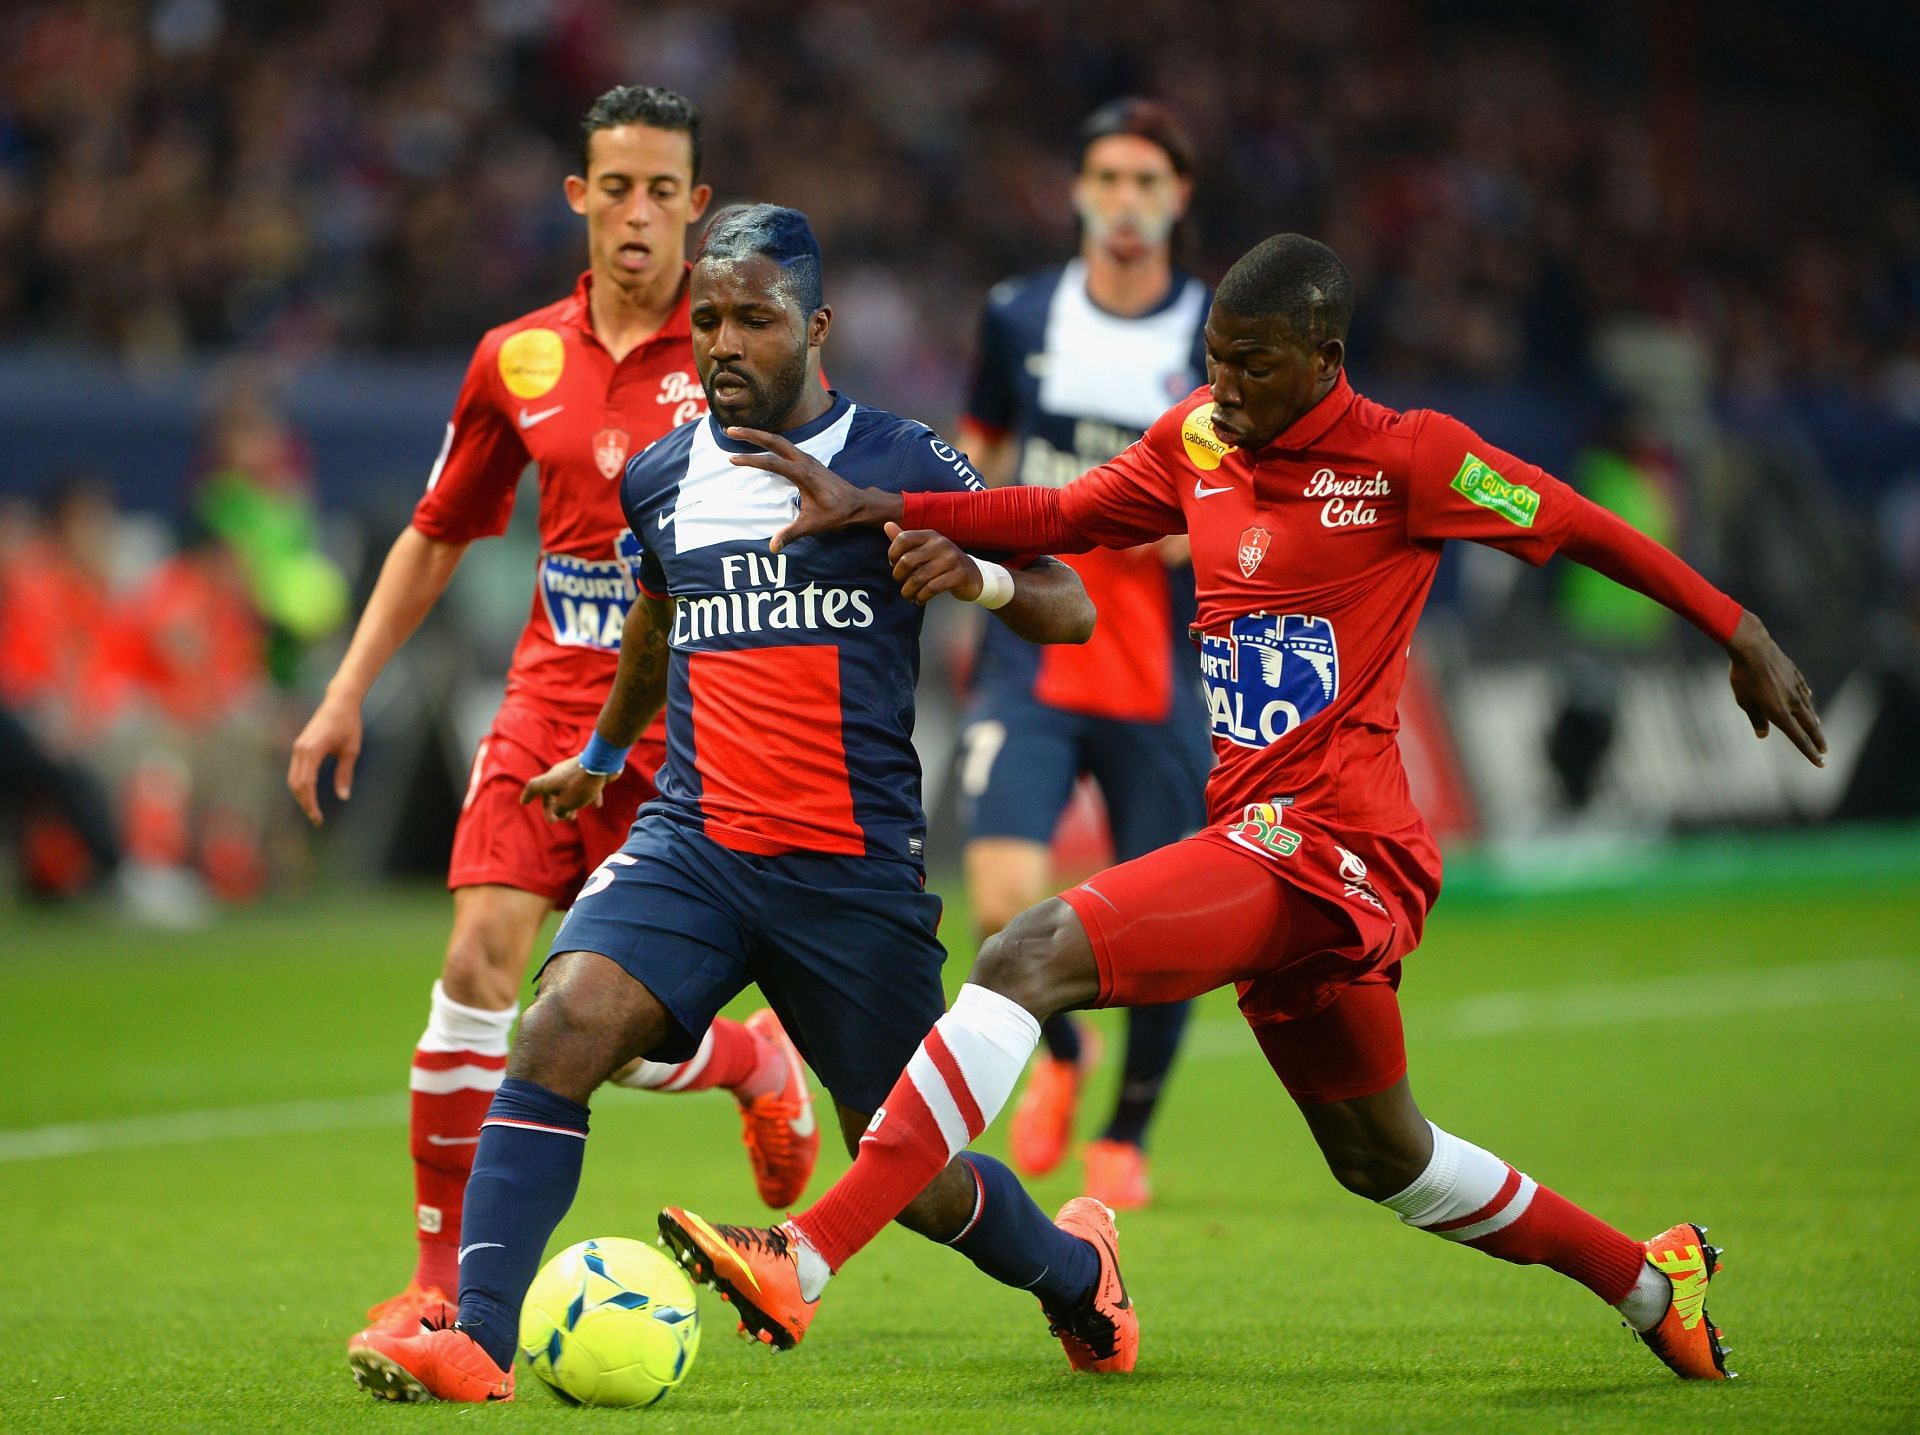 Stade Brestois play host to Clermont Foot on Sunday.